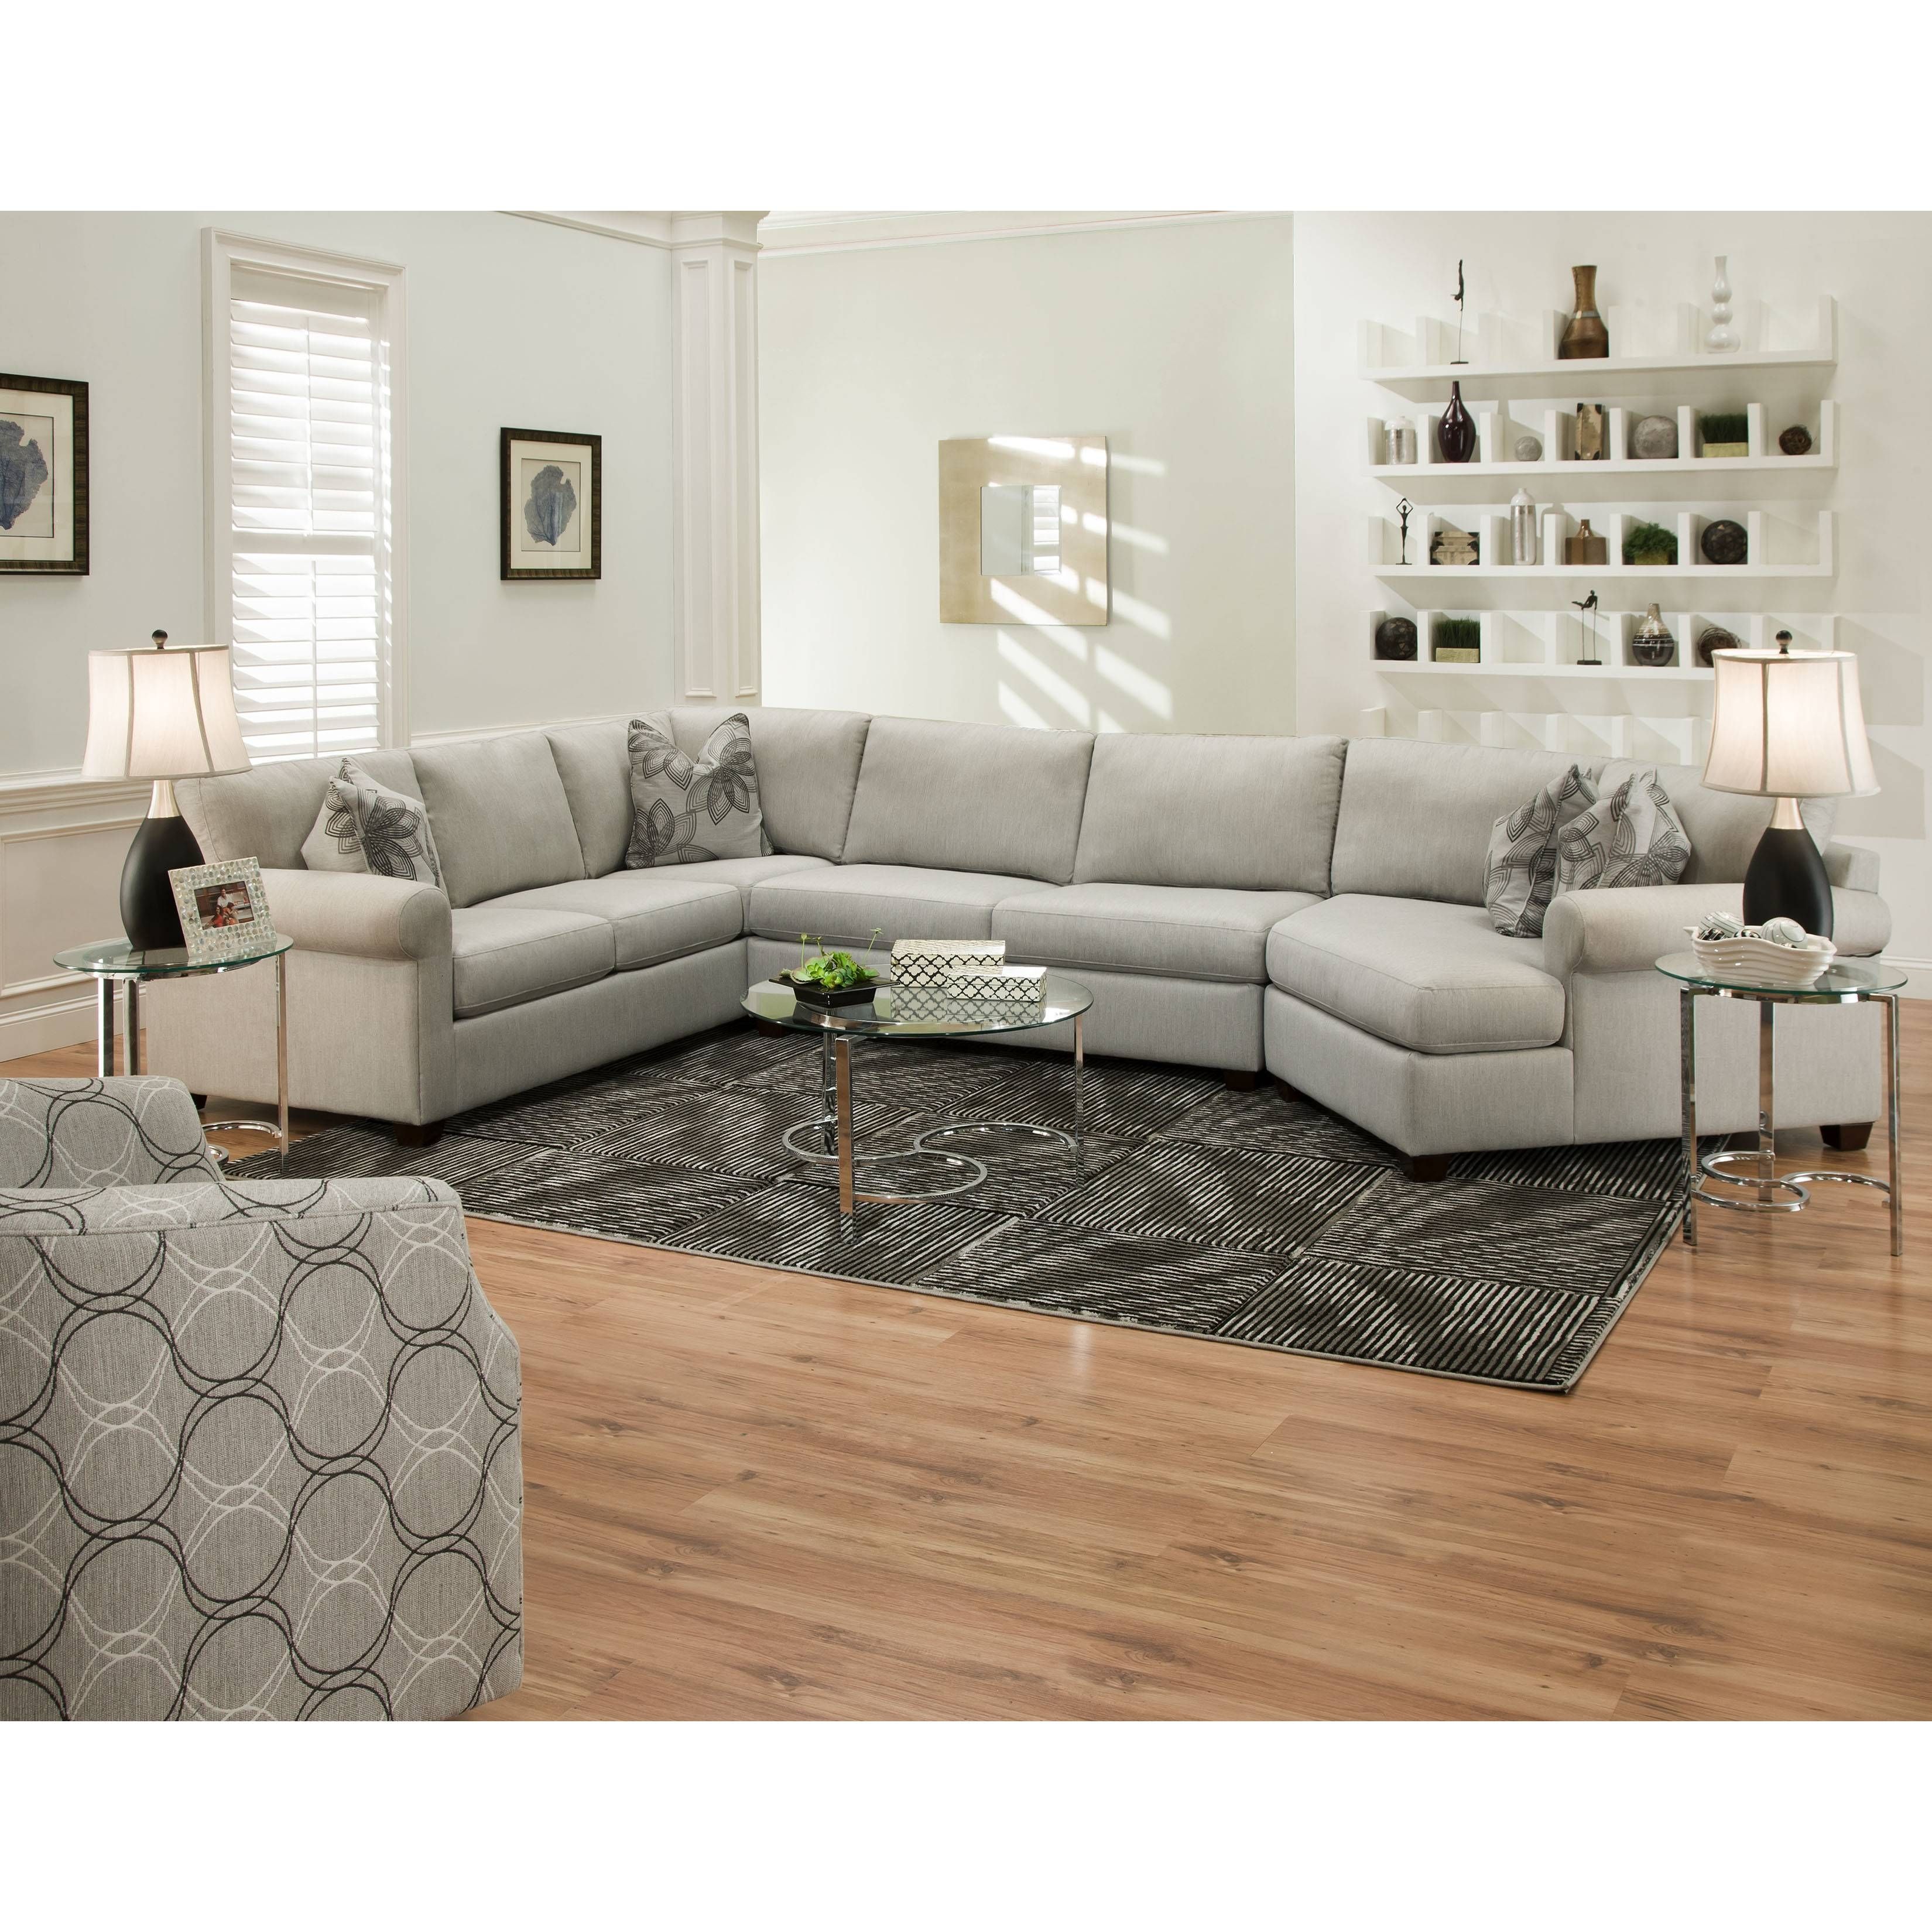 Furniture: Small Sectional Sofas For Small Spaces | Craigslist Inside Craigslist Sectional Sofa (View 27 of 30)